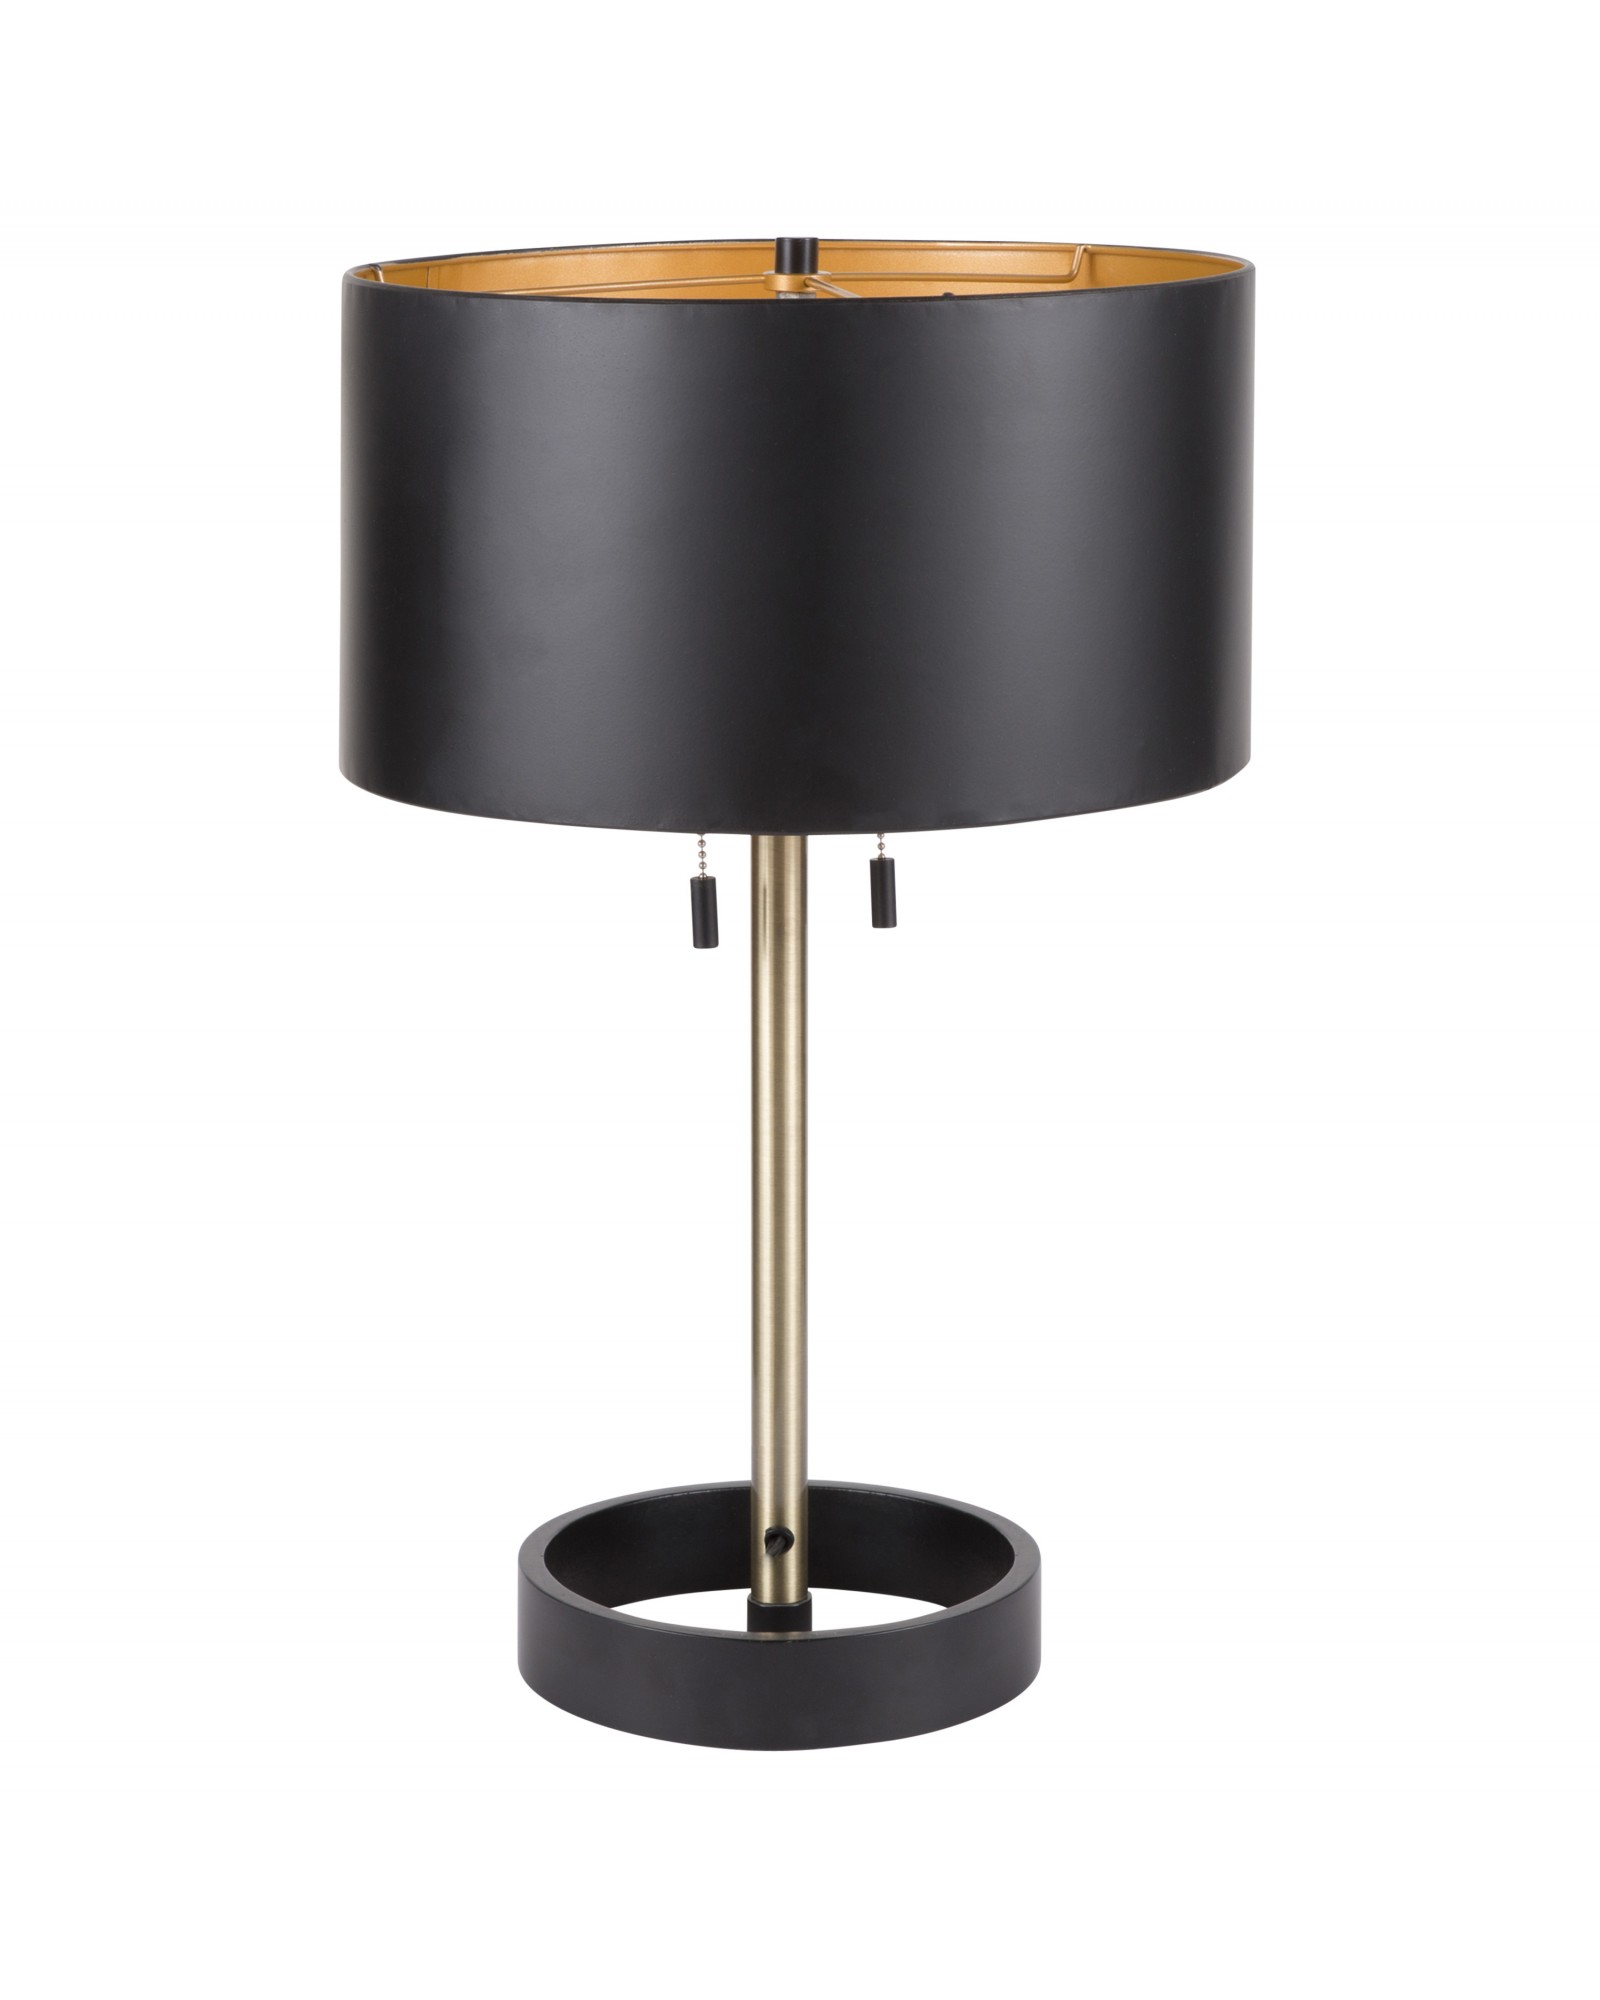 Hilton Contemporary Table Lamp in Black with Gold Accents